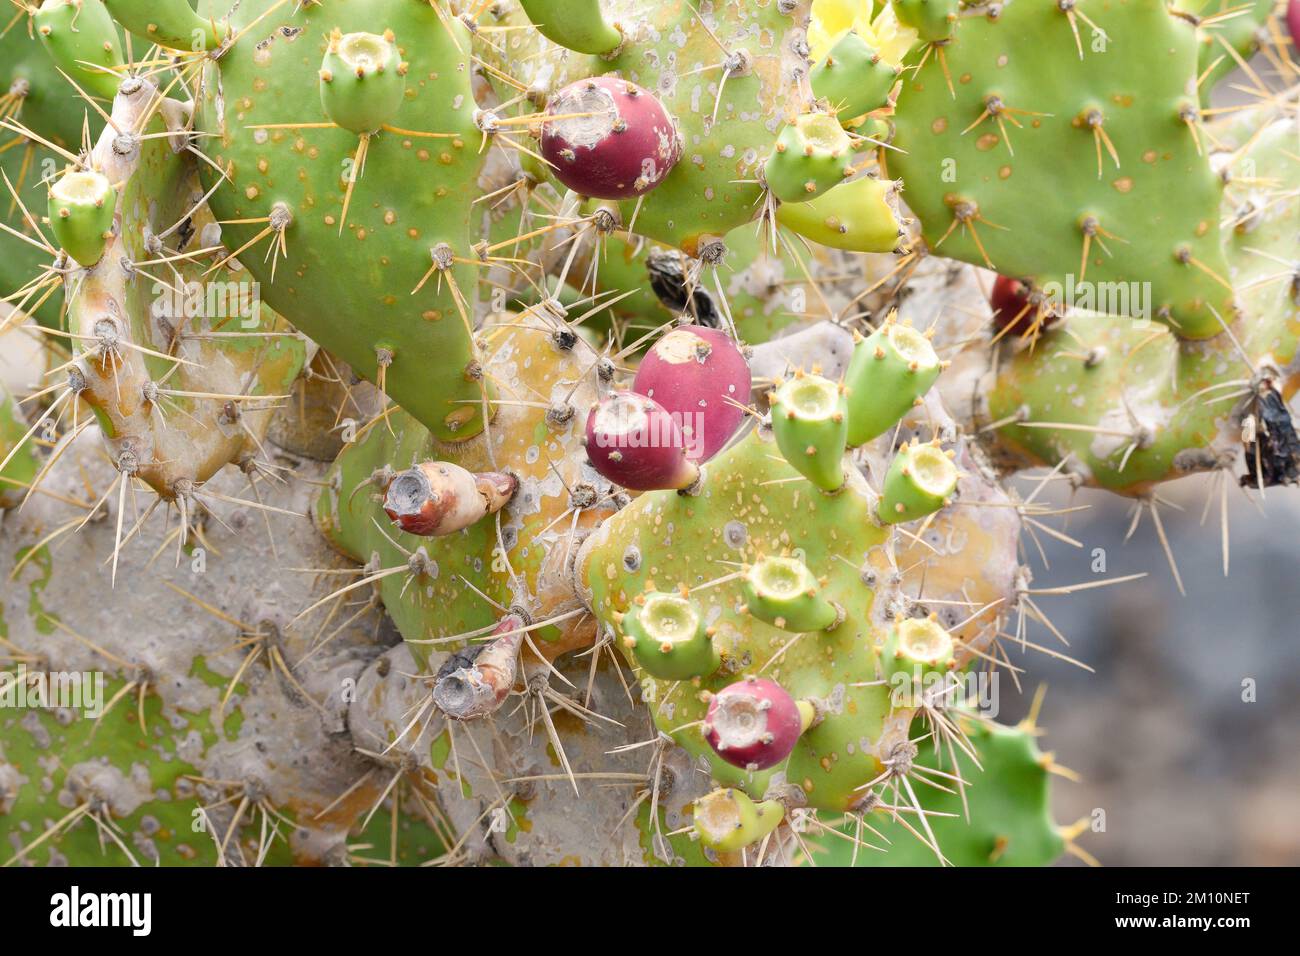 Opuntia ficus with fruits in the foreground Stock Photo